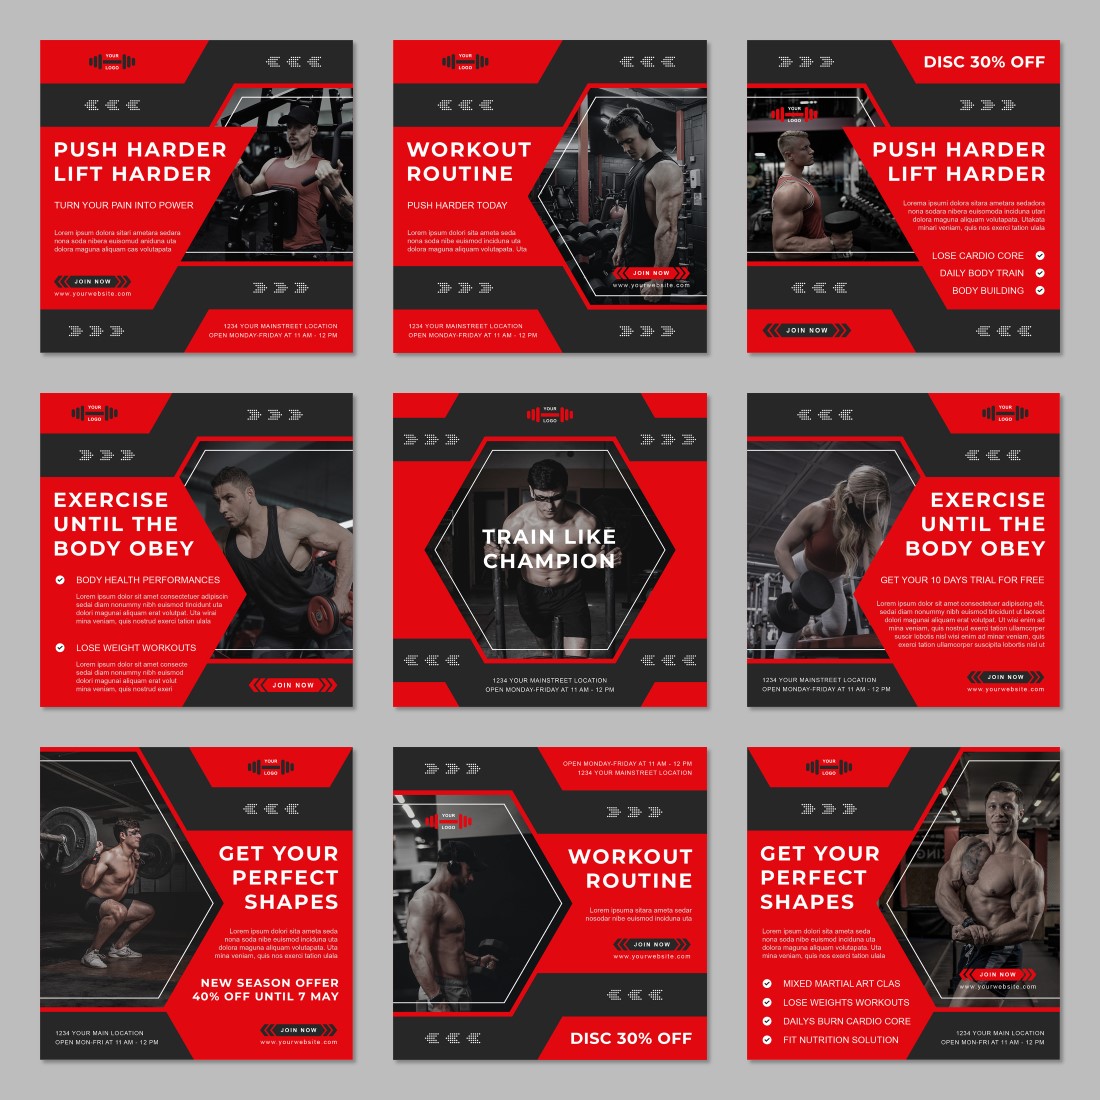 Fitness Workout Social Media Post Template created by sigma studio.